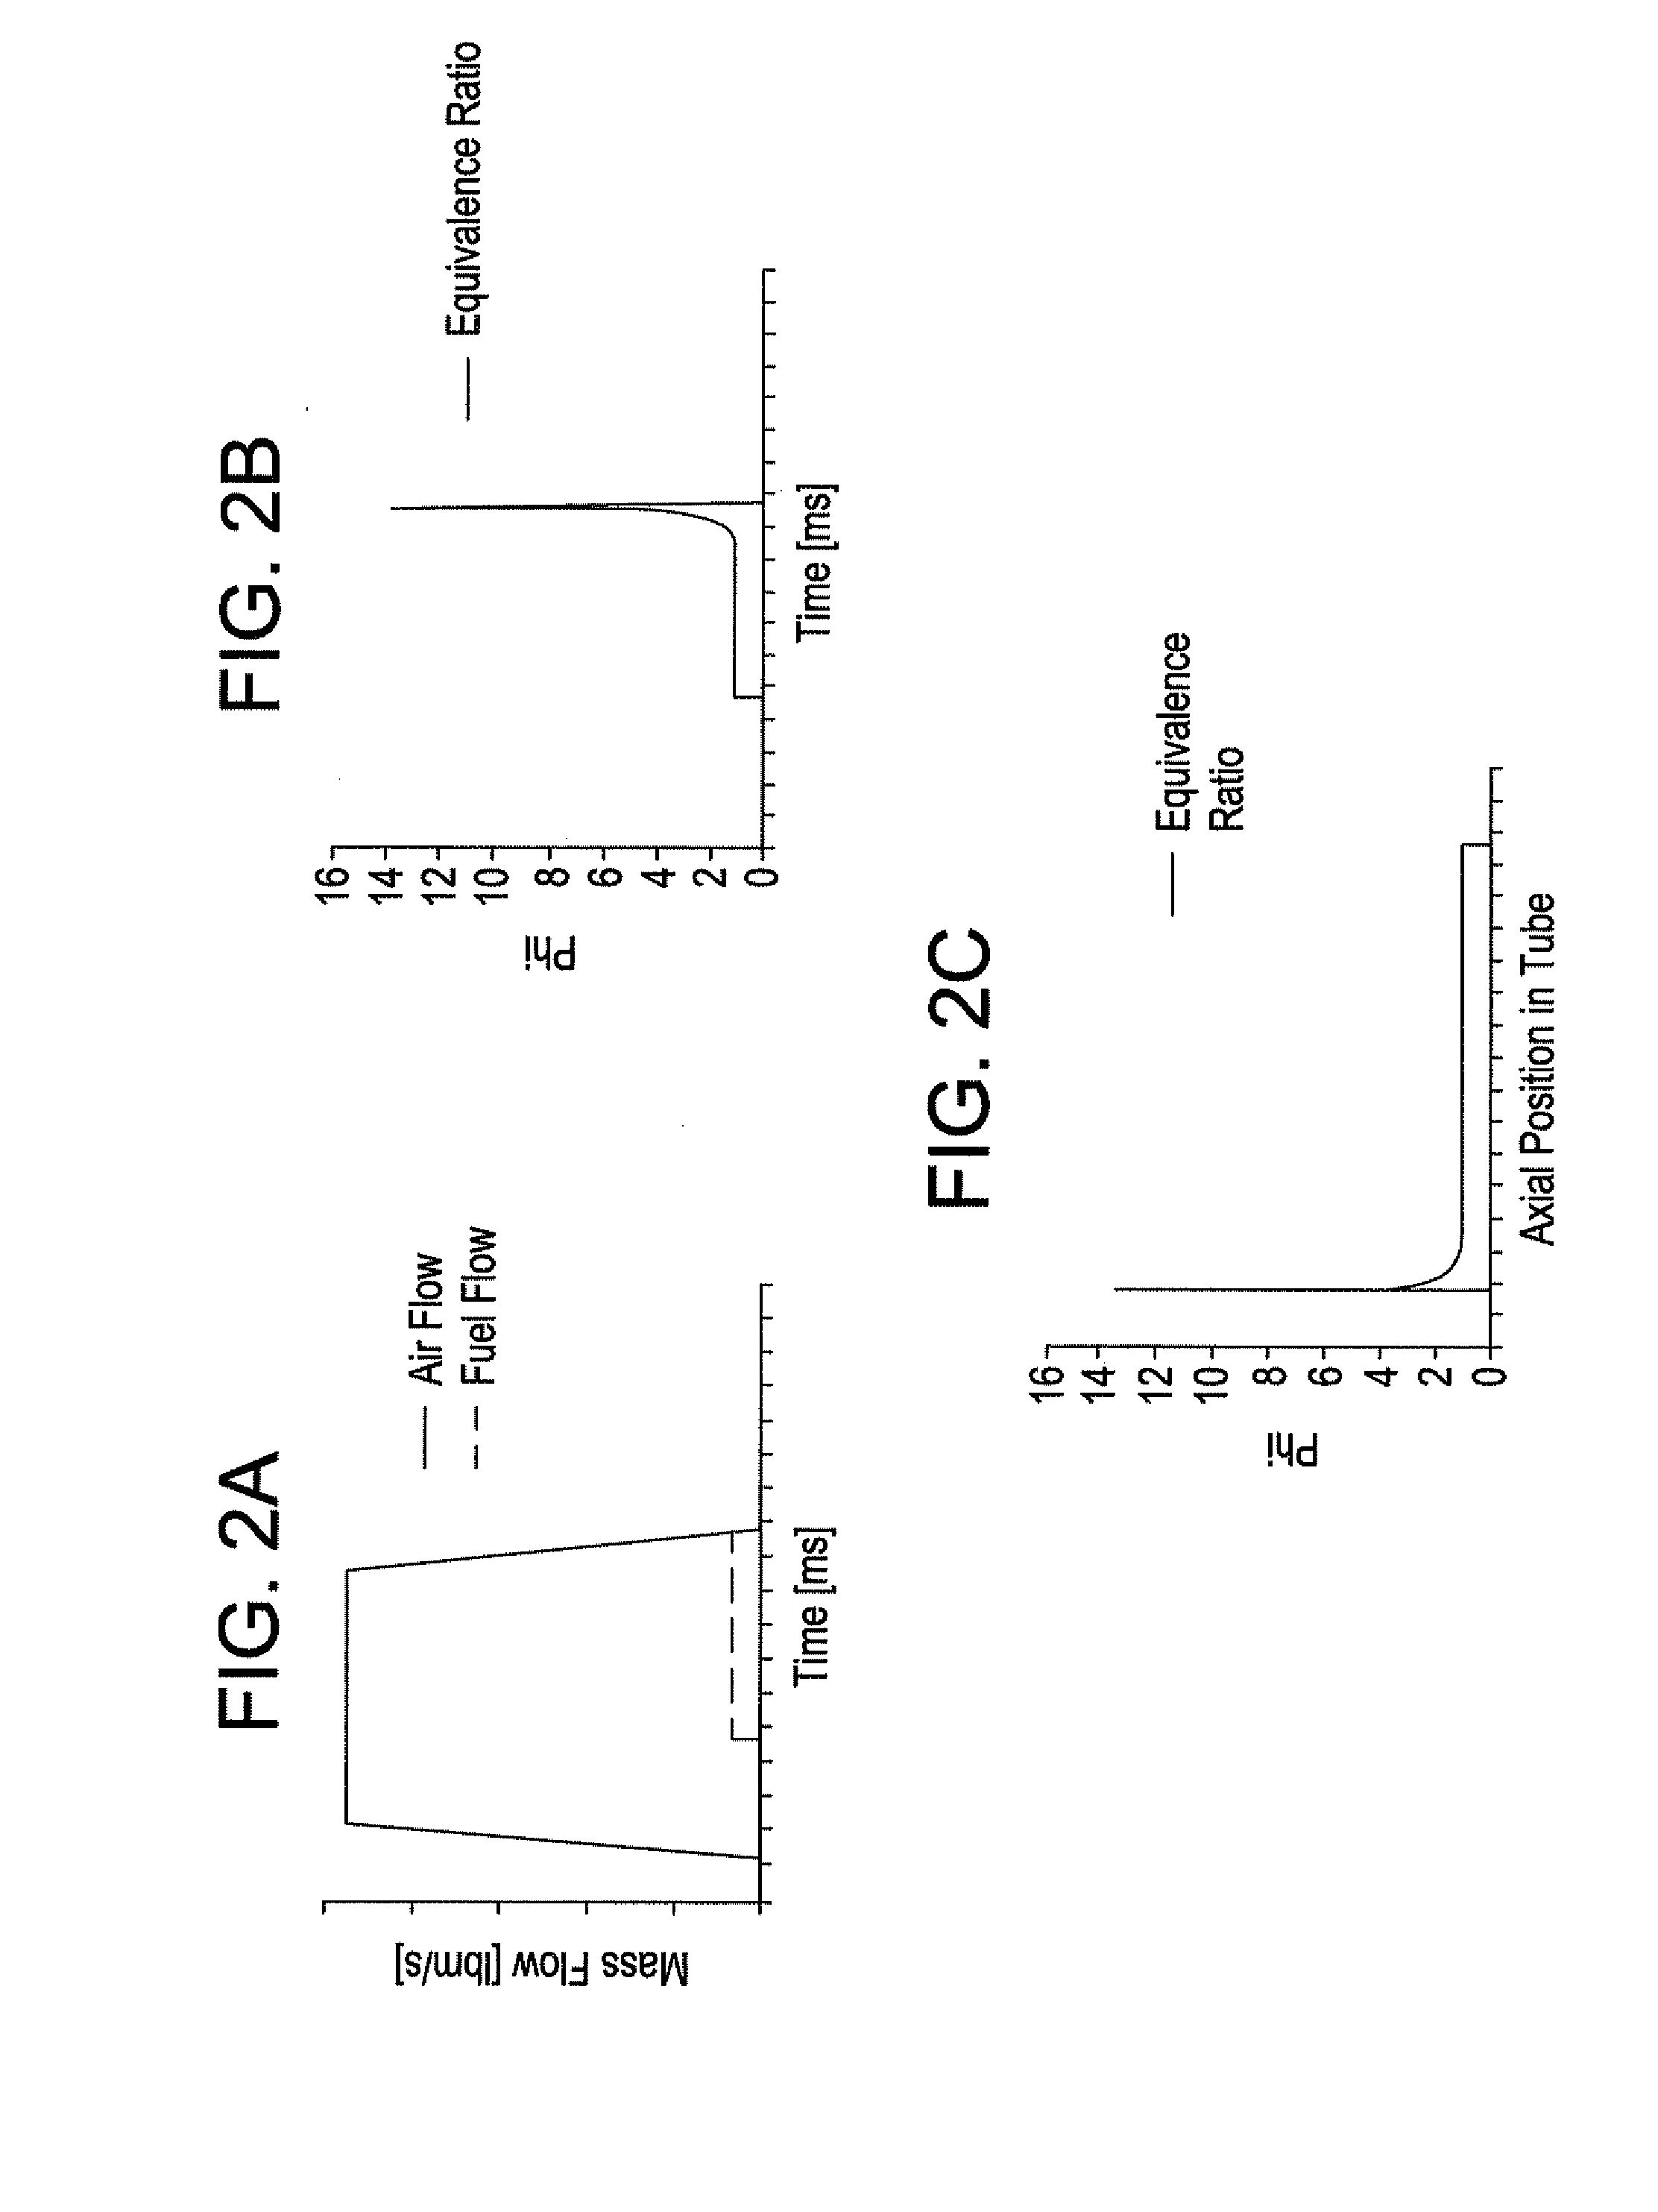 Method and apparatus for tailoring the equivalence ratio in a valved pulse detonation combustor